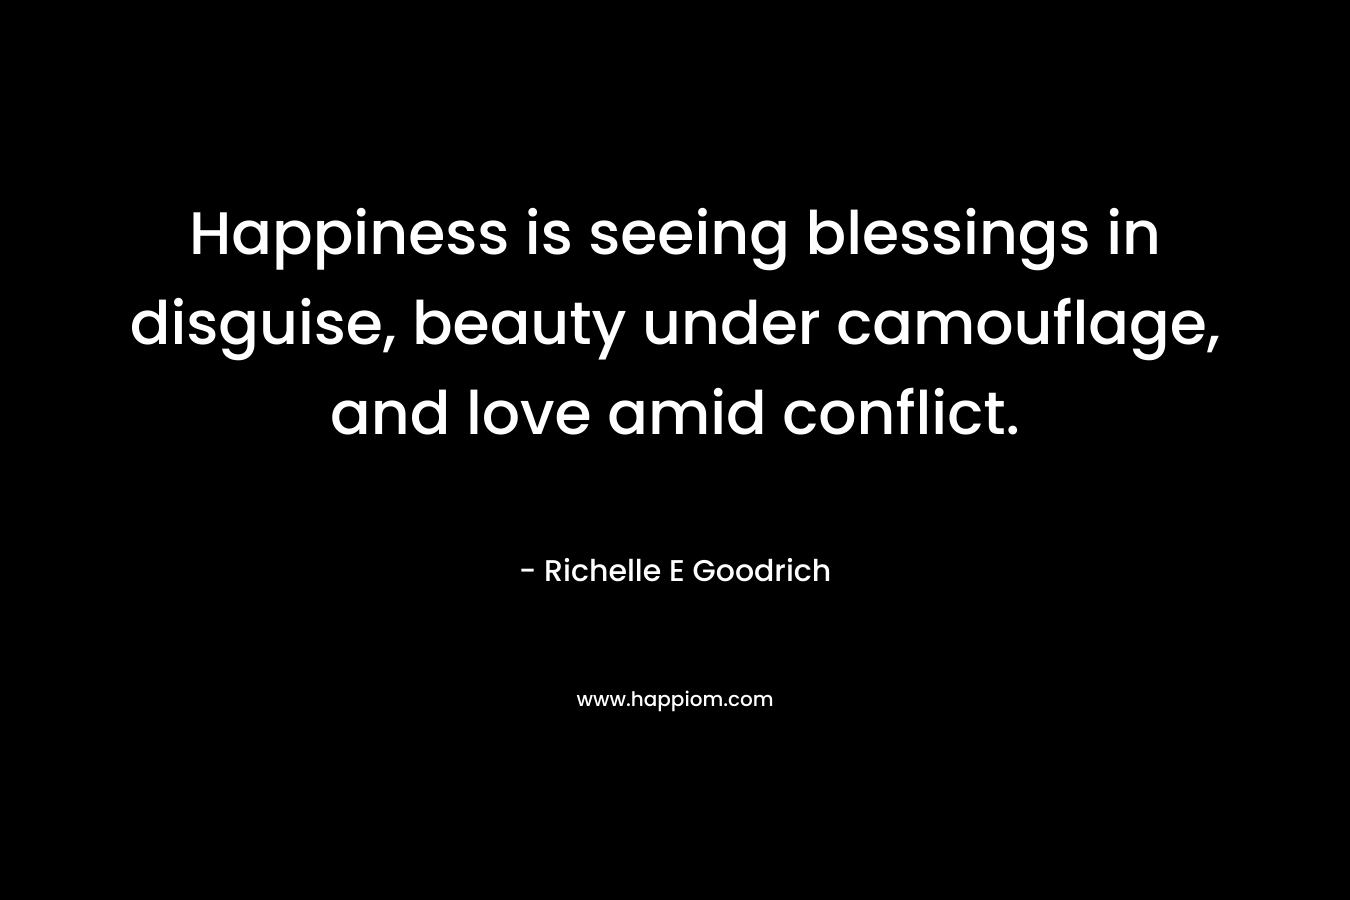 Happiness is seeing blessings in disguise, beauty under camouflage, and love amid conflict. – Richelle E Goodrich